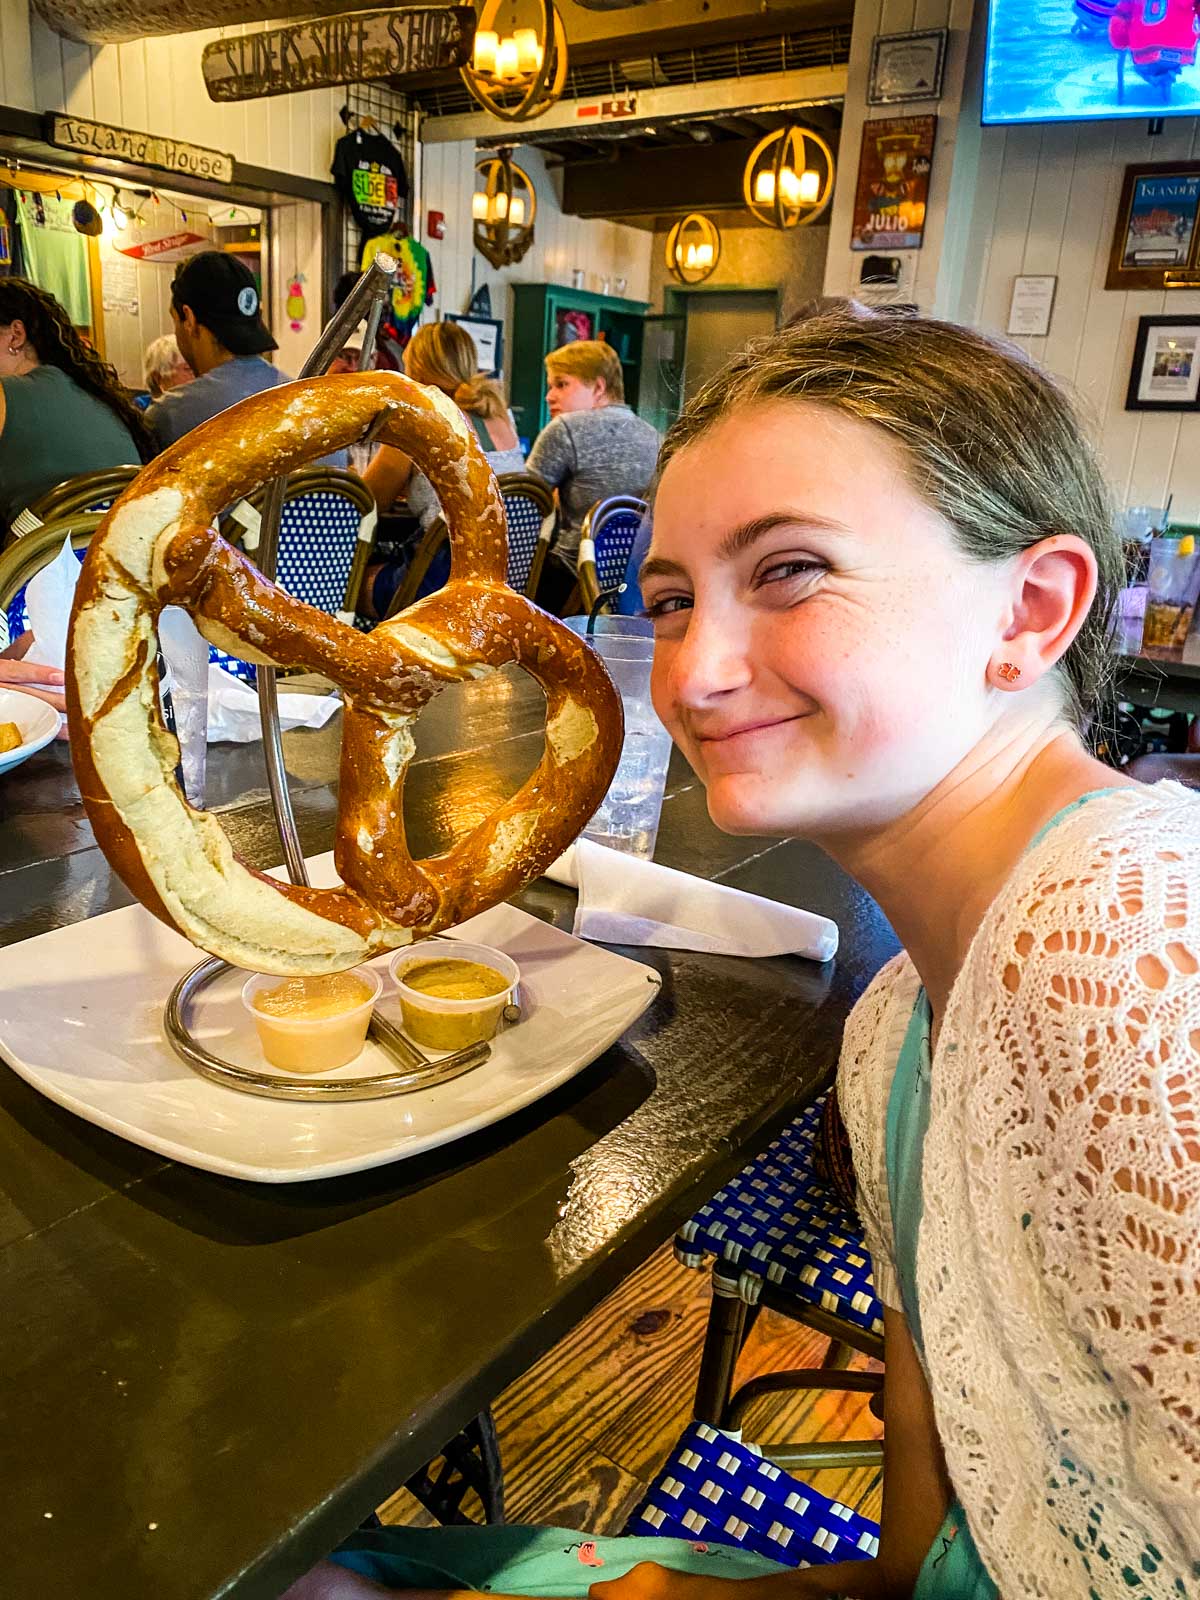 A young girl is about to eat a giant pretzel as big as her head.